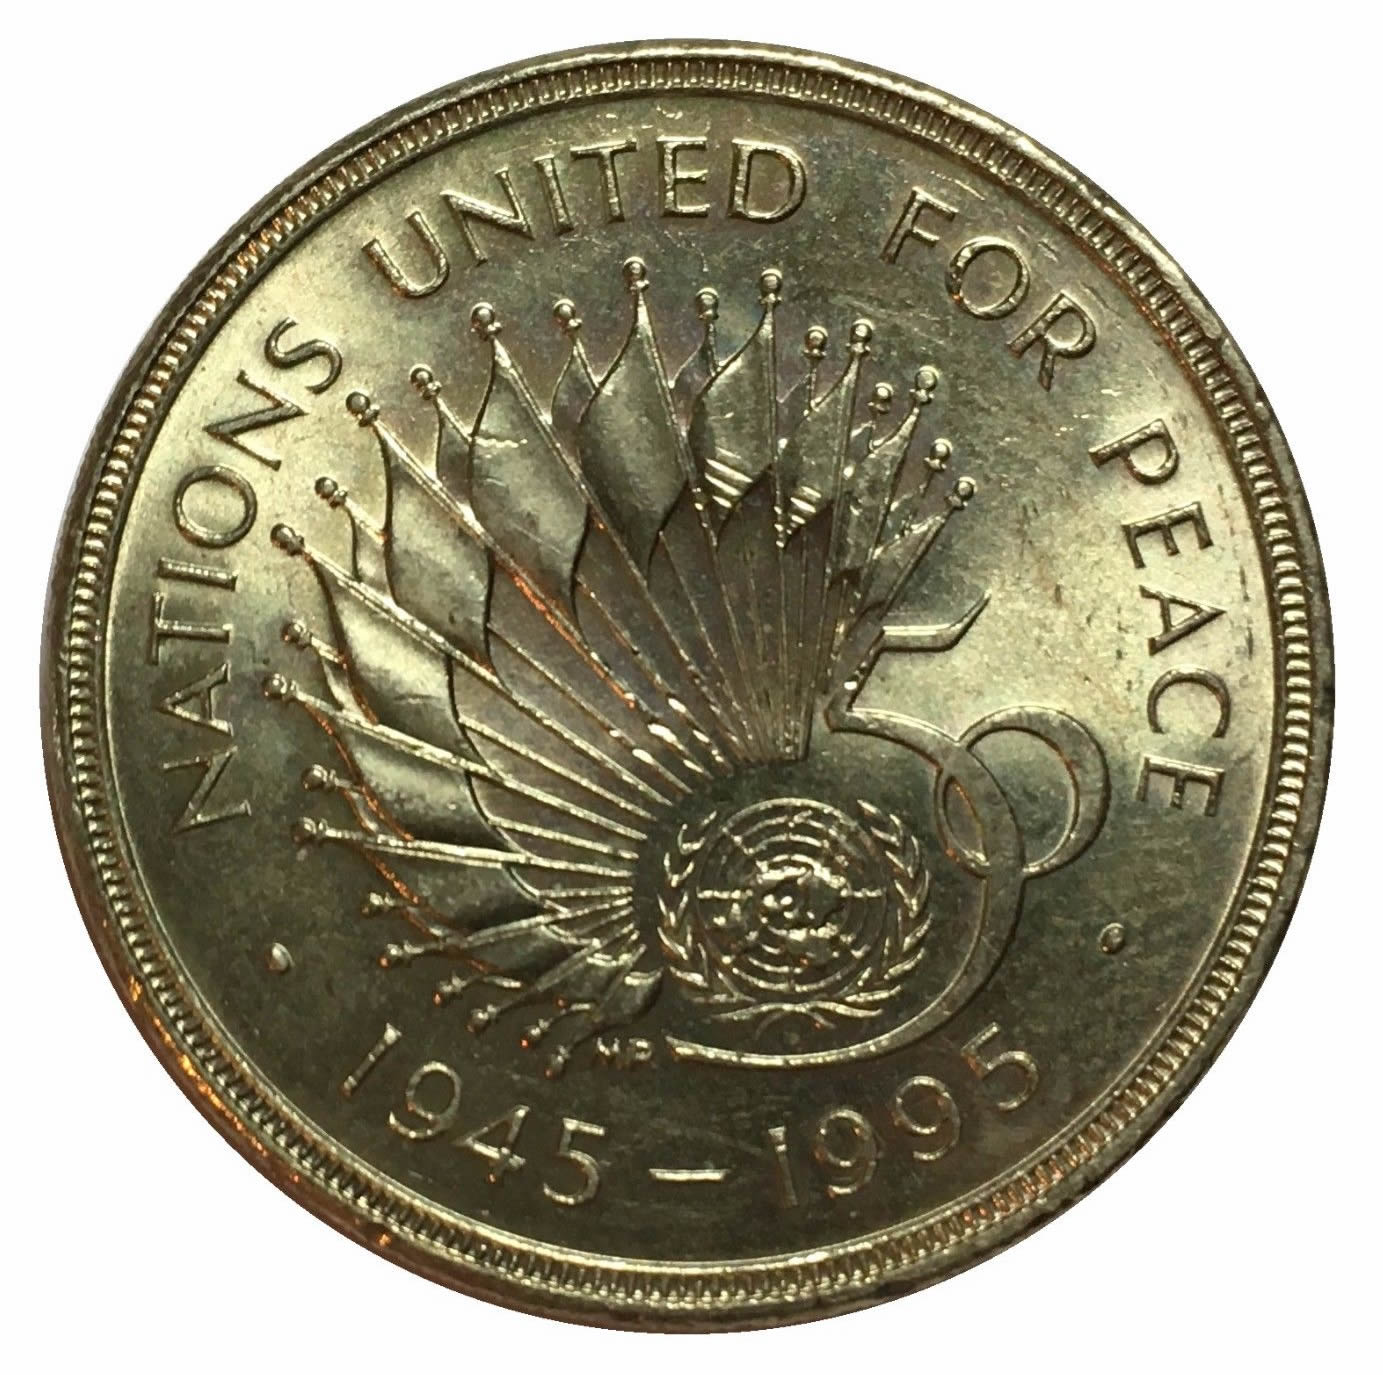 1995 Two Pounds Coin